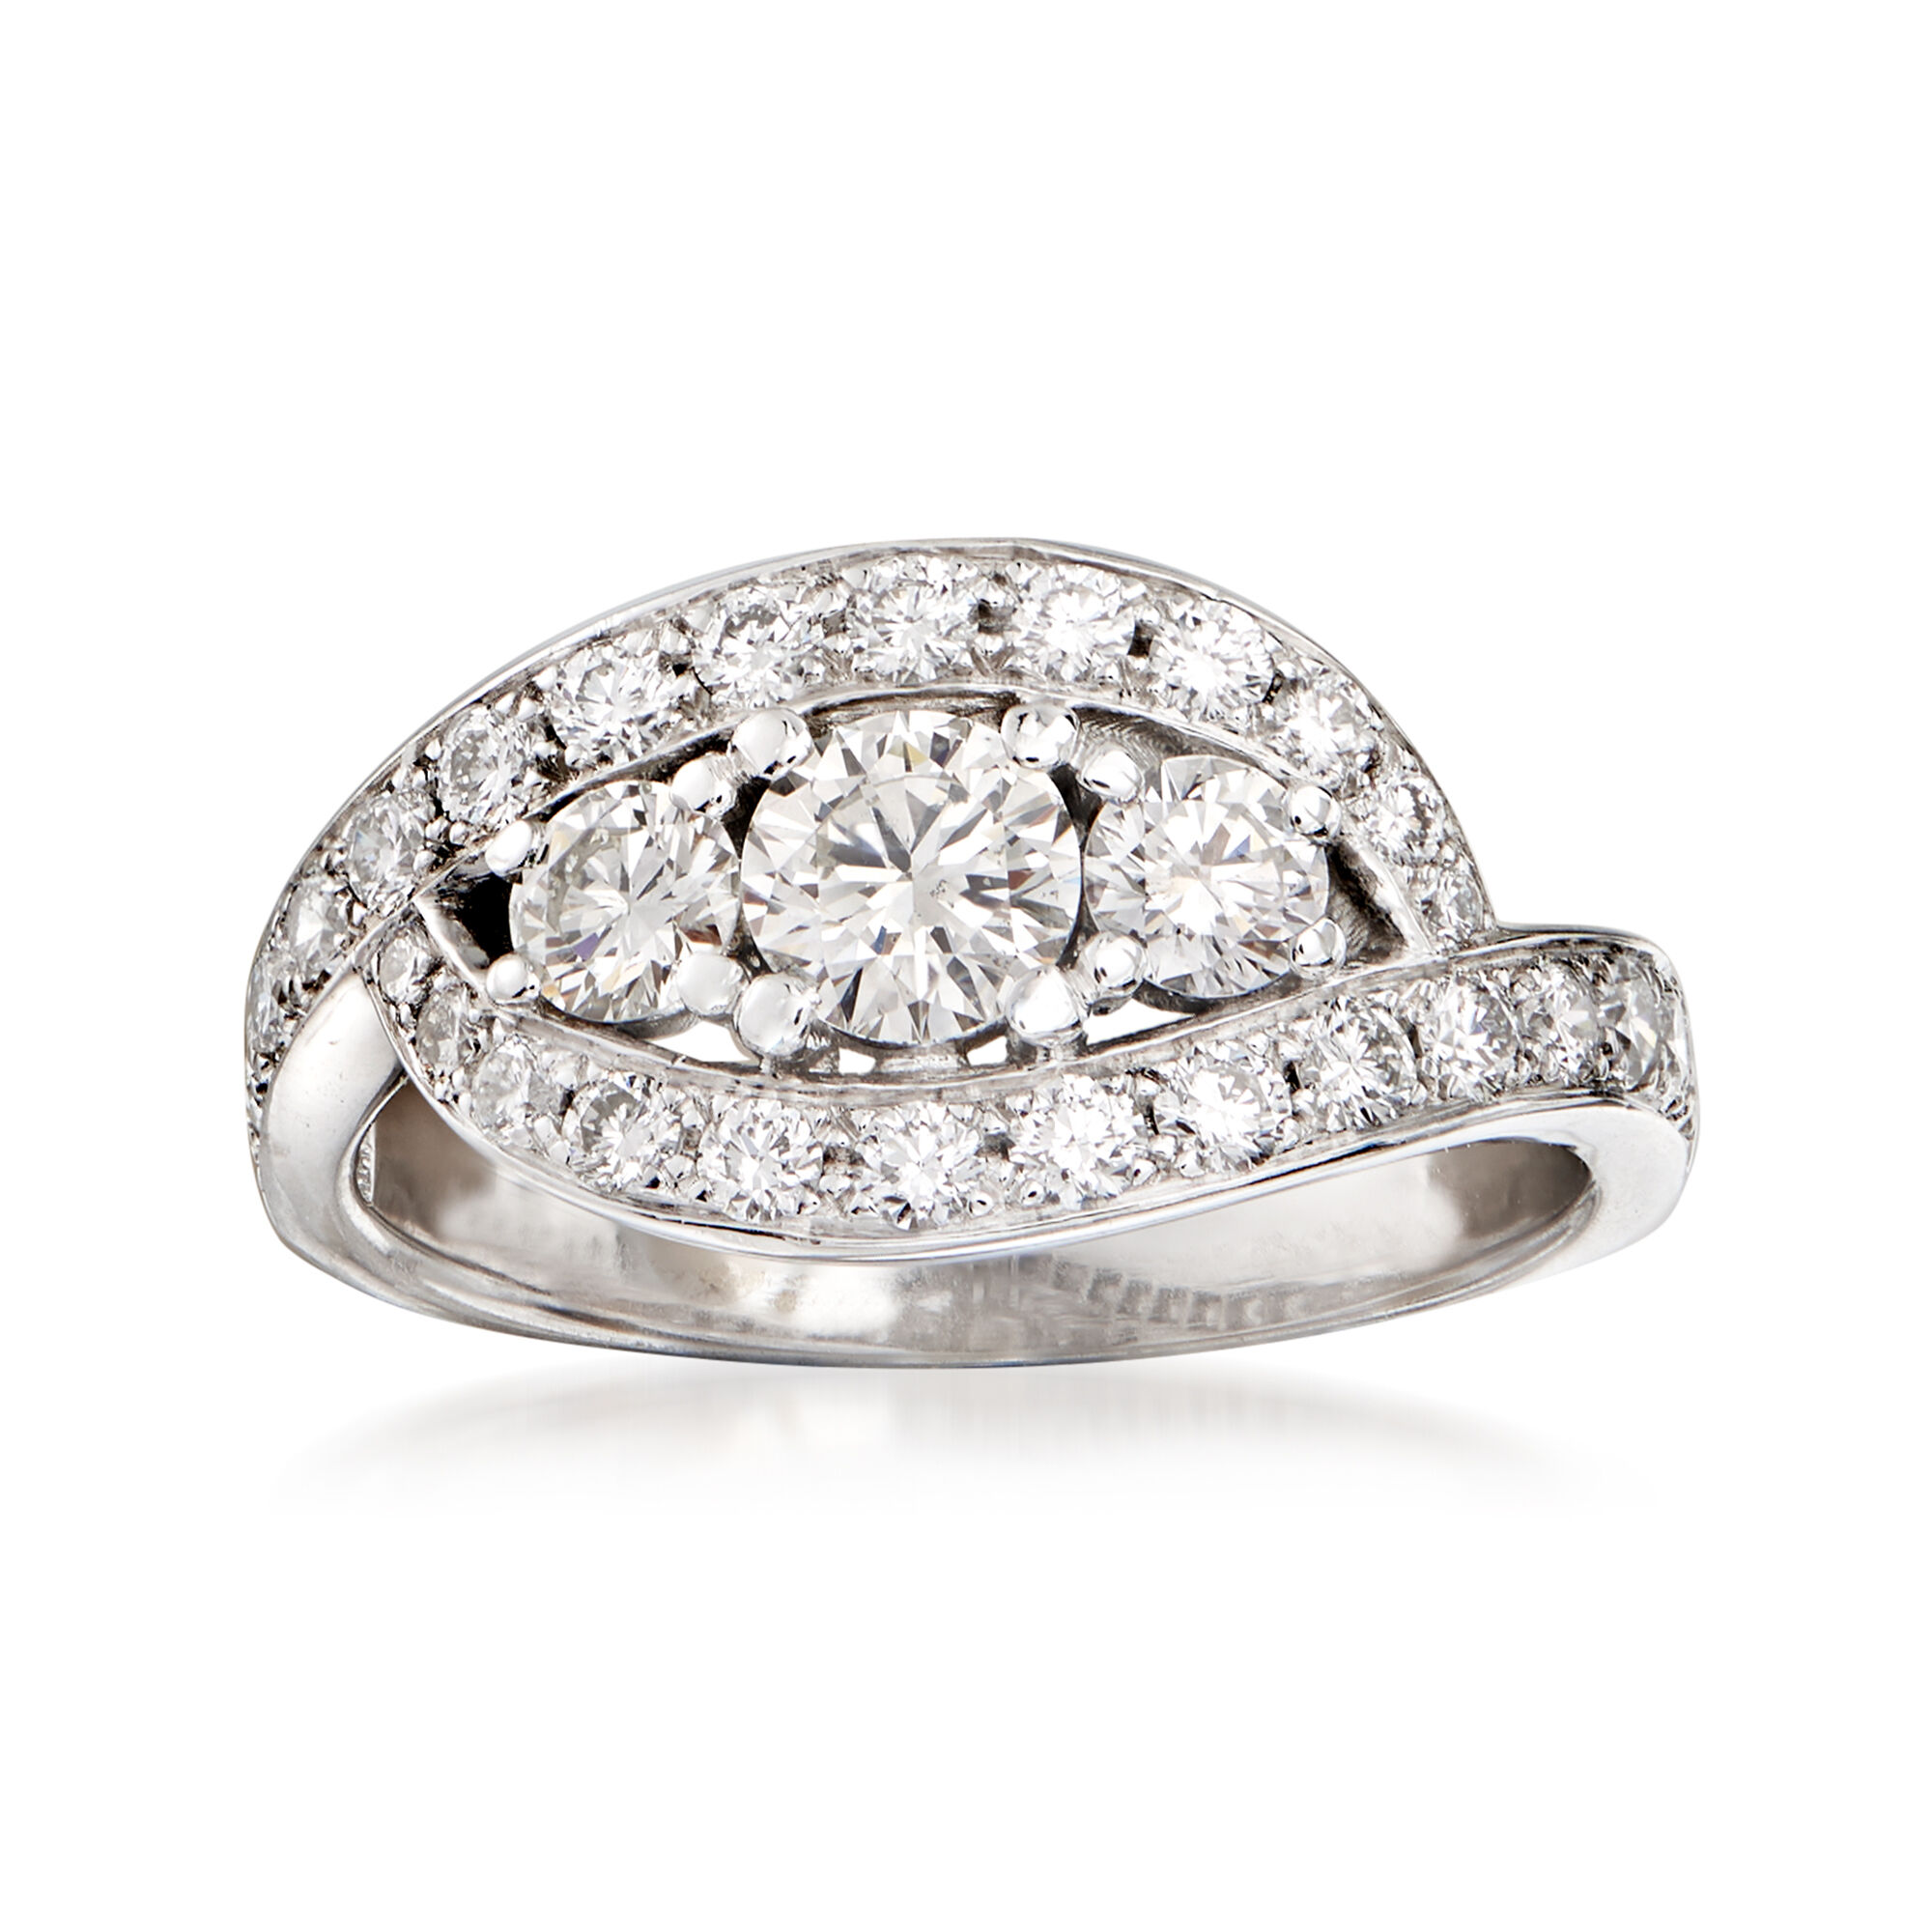 White Gold Diamond Cocktail Rings Online, 55% OFF | www.rupit.com